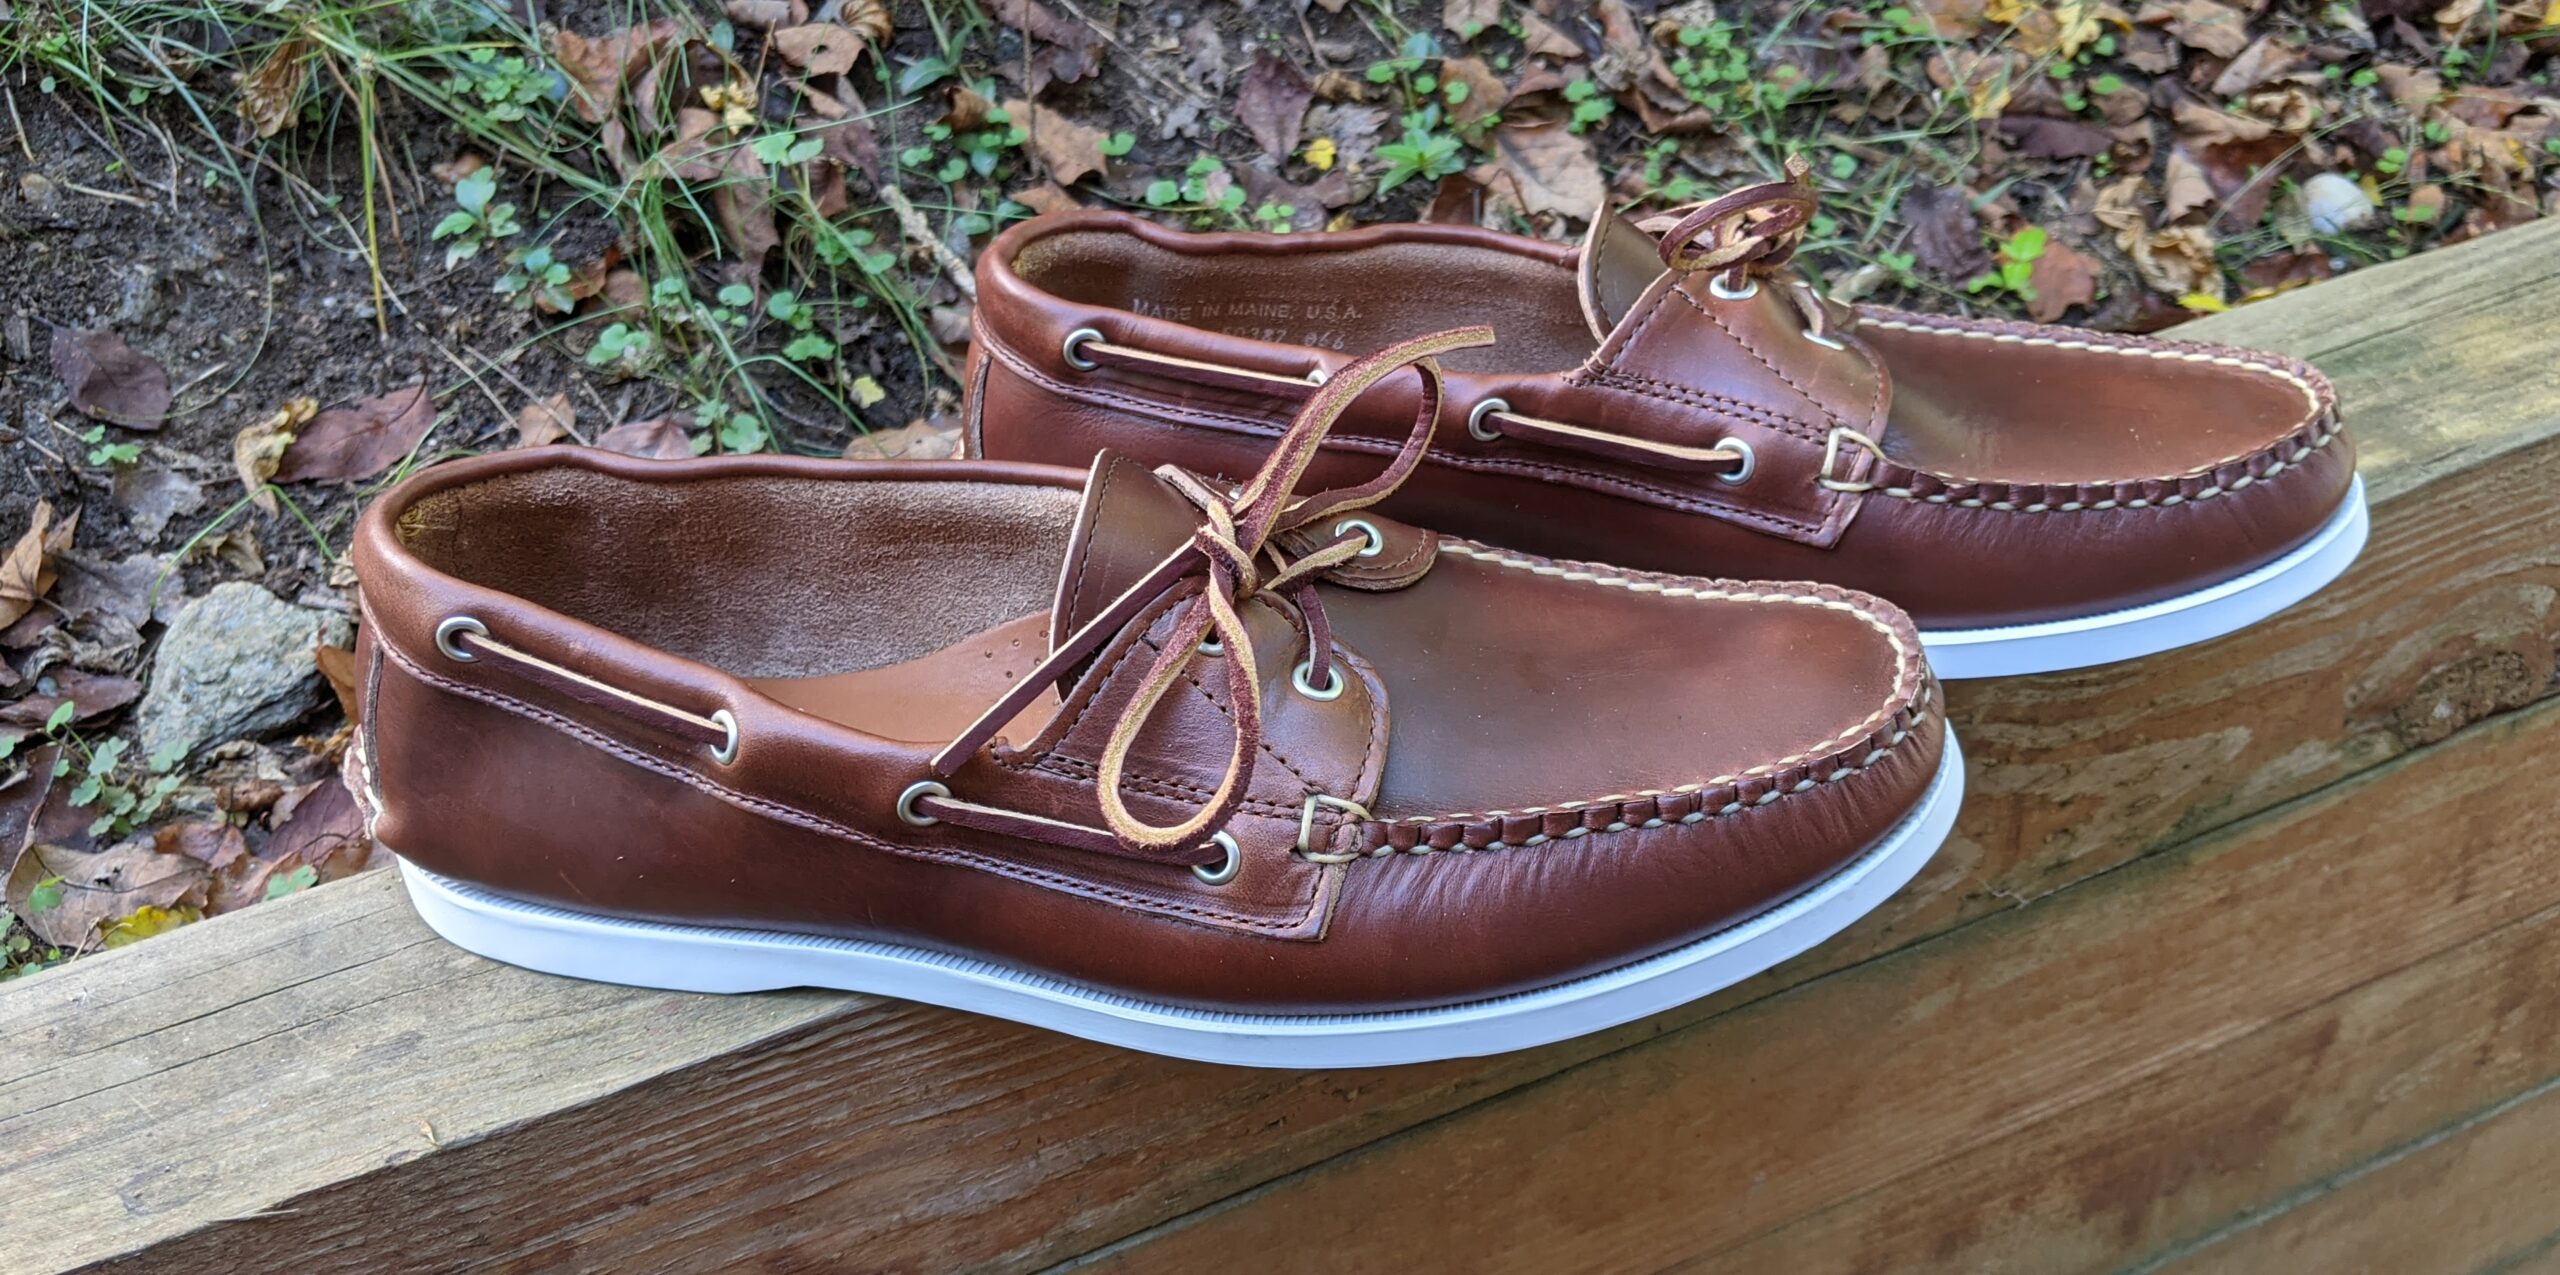 Rancourt Read Boat Shoes: Out of the Box